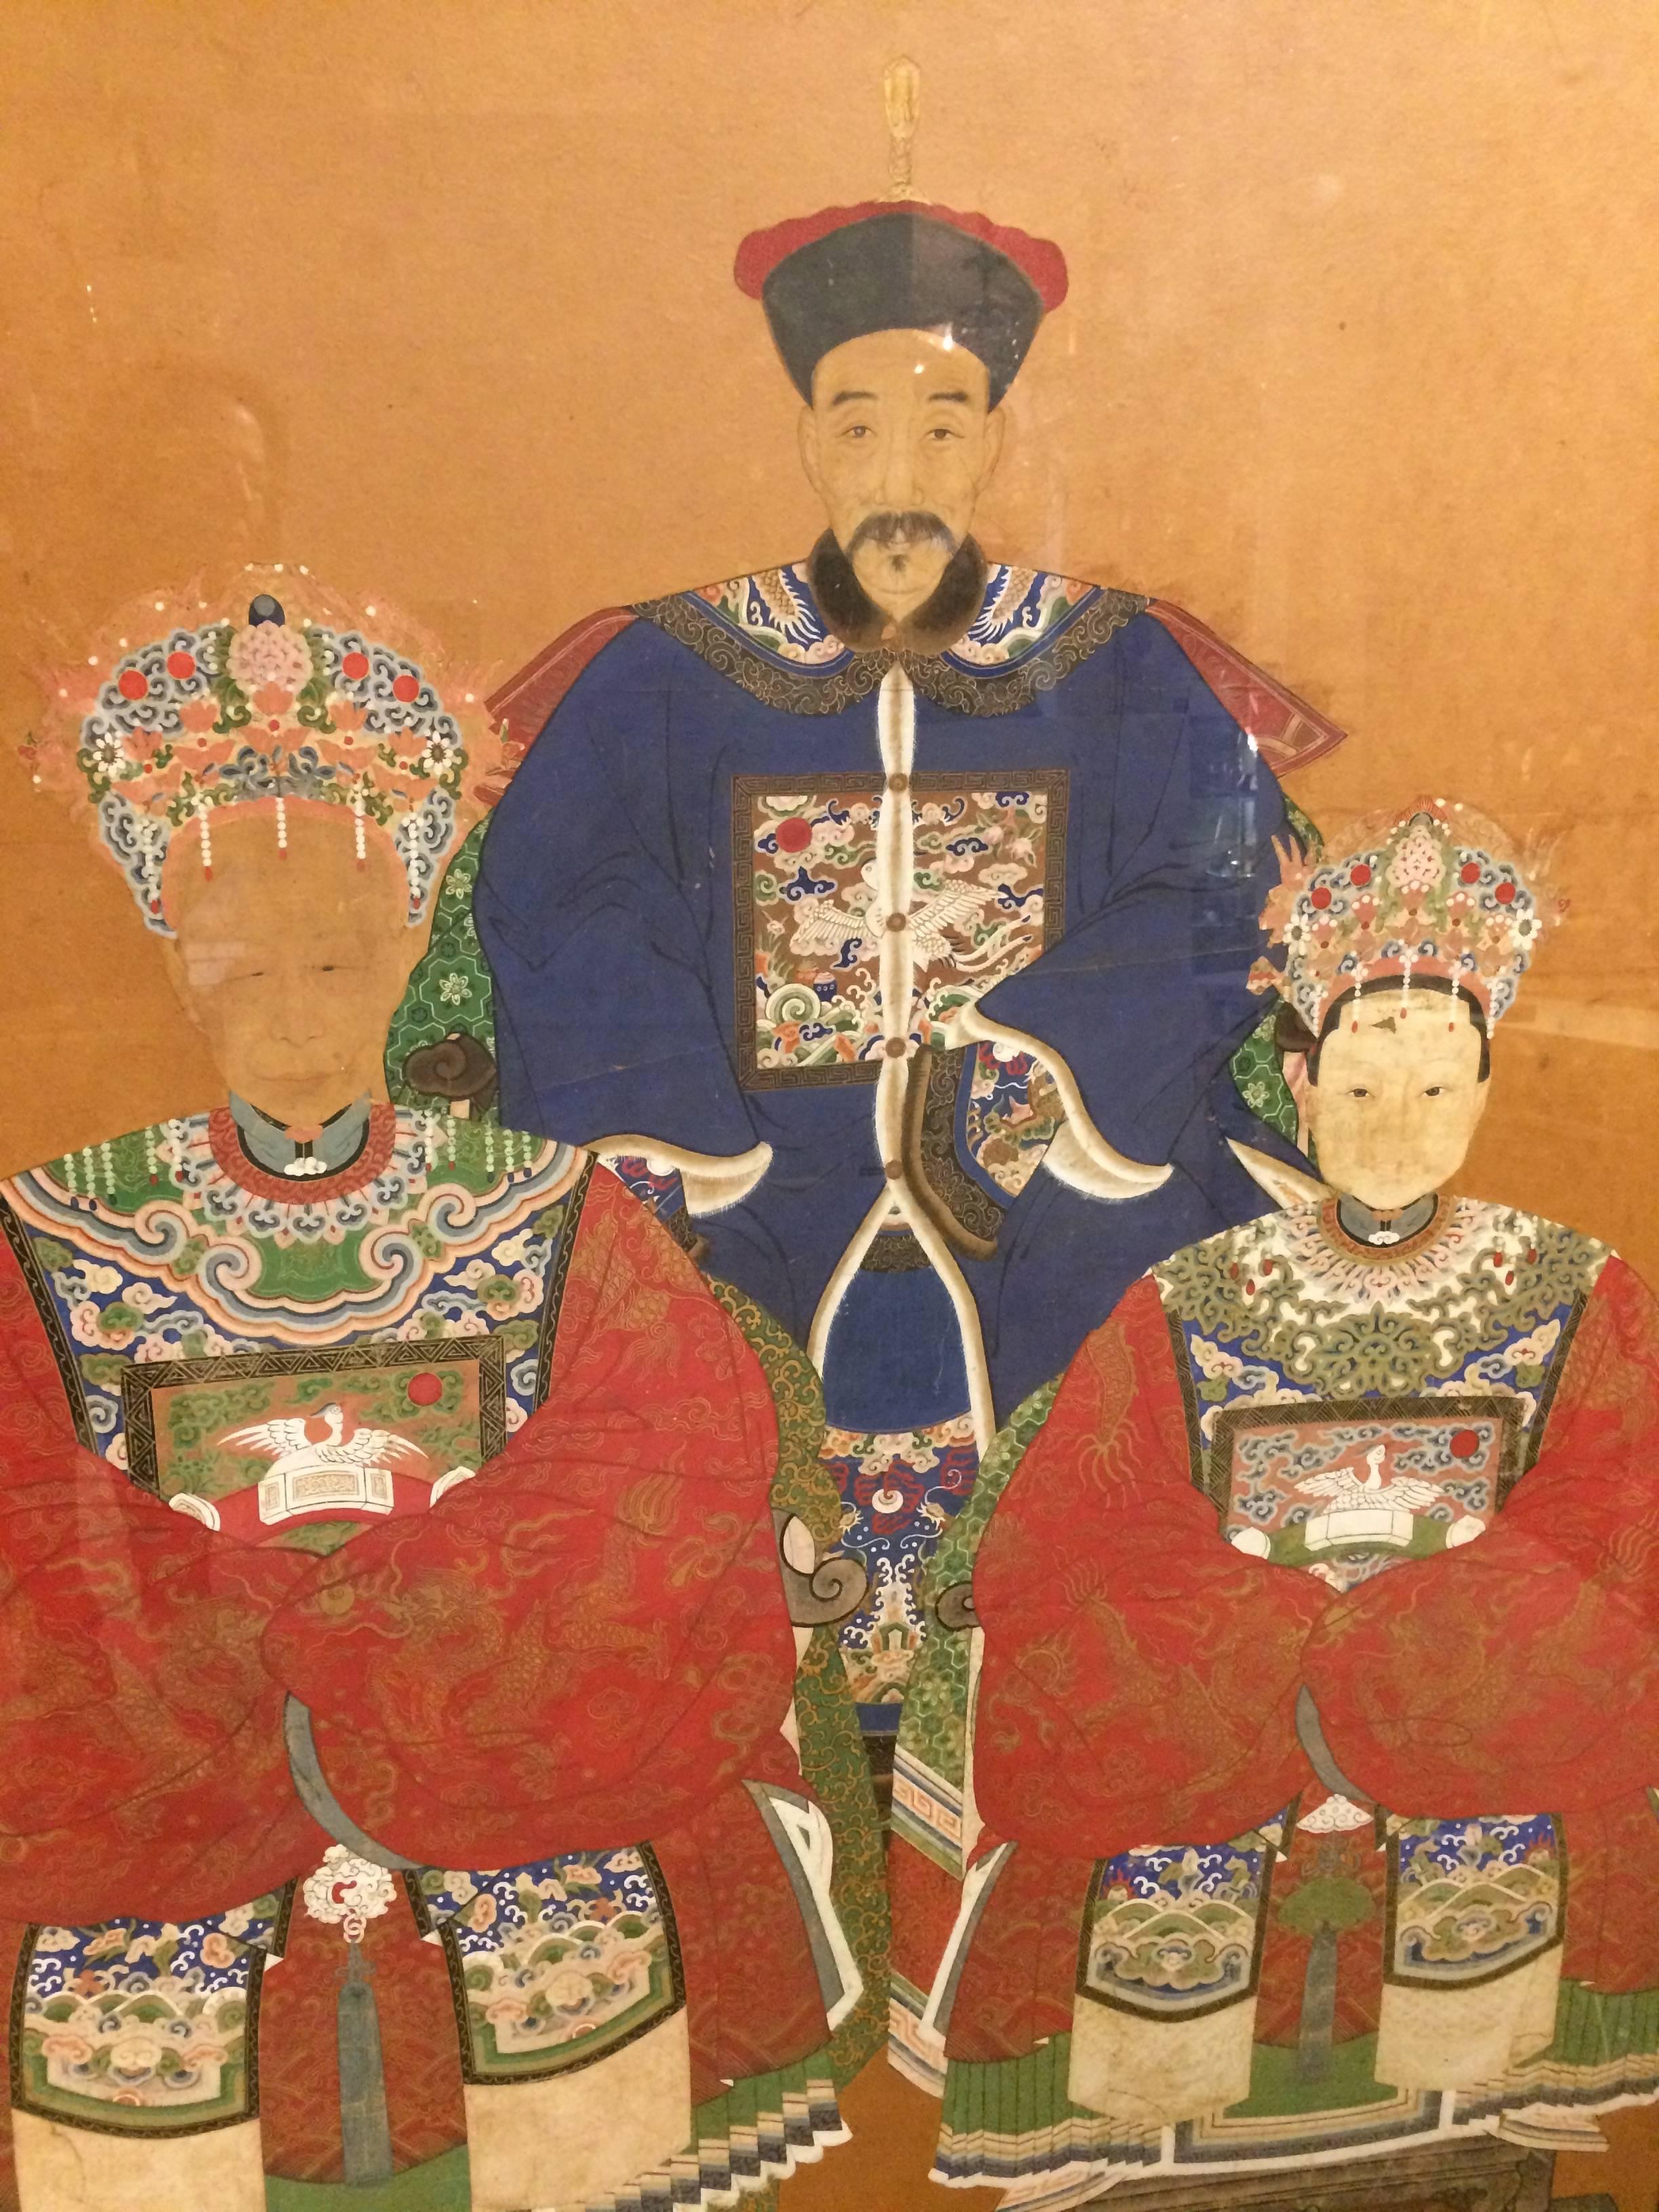 Gorgeous and impressive in scale and age, this is an 18th century original watercolor on parchment of three Chinese royalty rendered with meticulous detail and color palette.